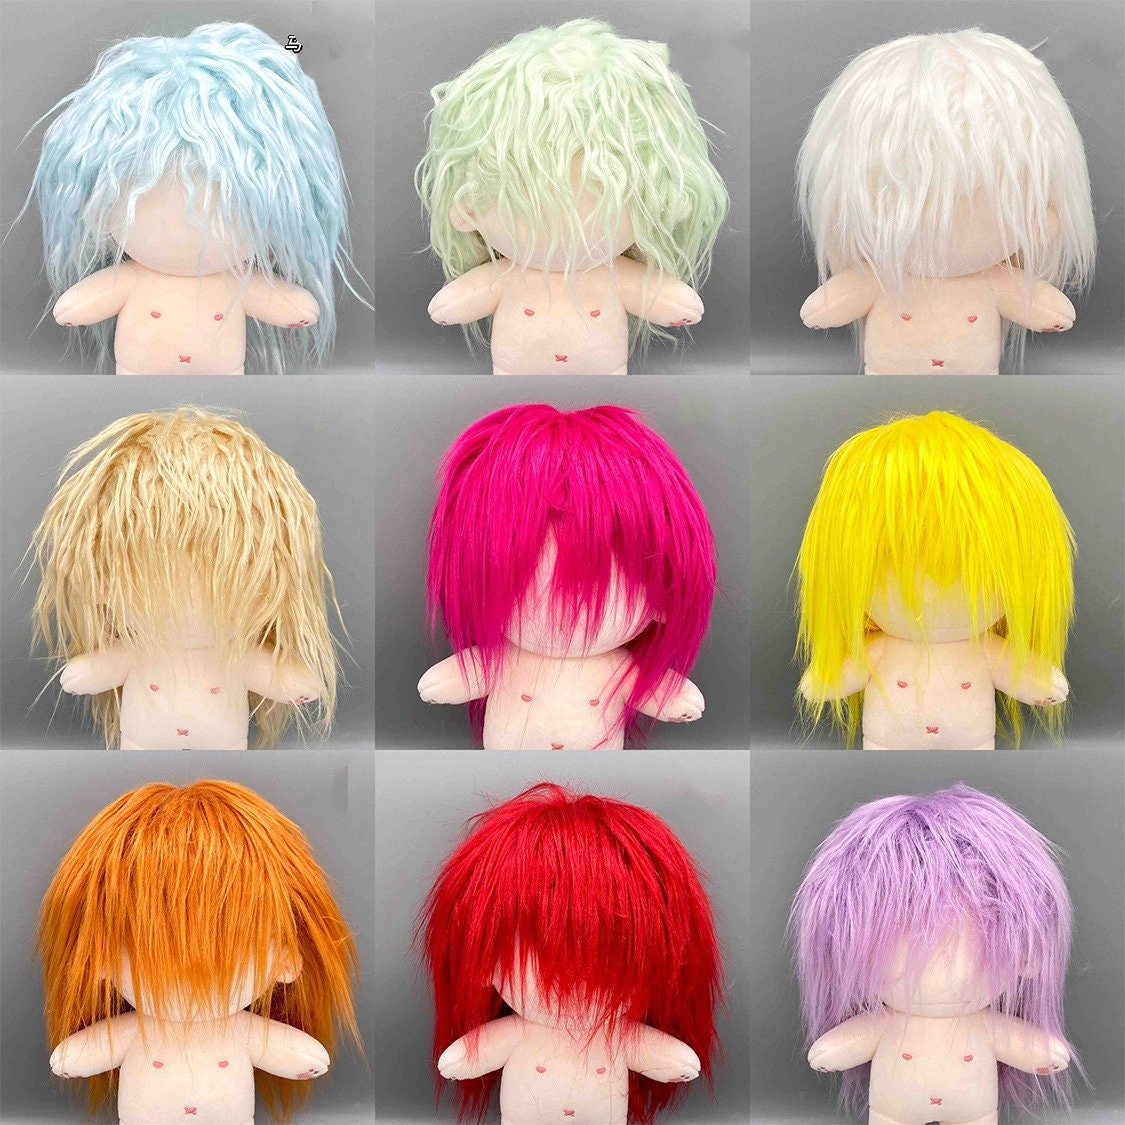 12pcs Doll Wig Doll DIY Wig Doll Hair wefts Wigs Wig Doll Hair Wefts Curly  Doll Hair Fashion Doll Hair Straight Doll Hair for Crafts Component